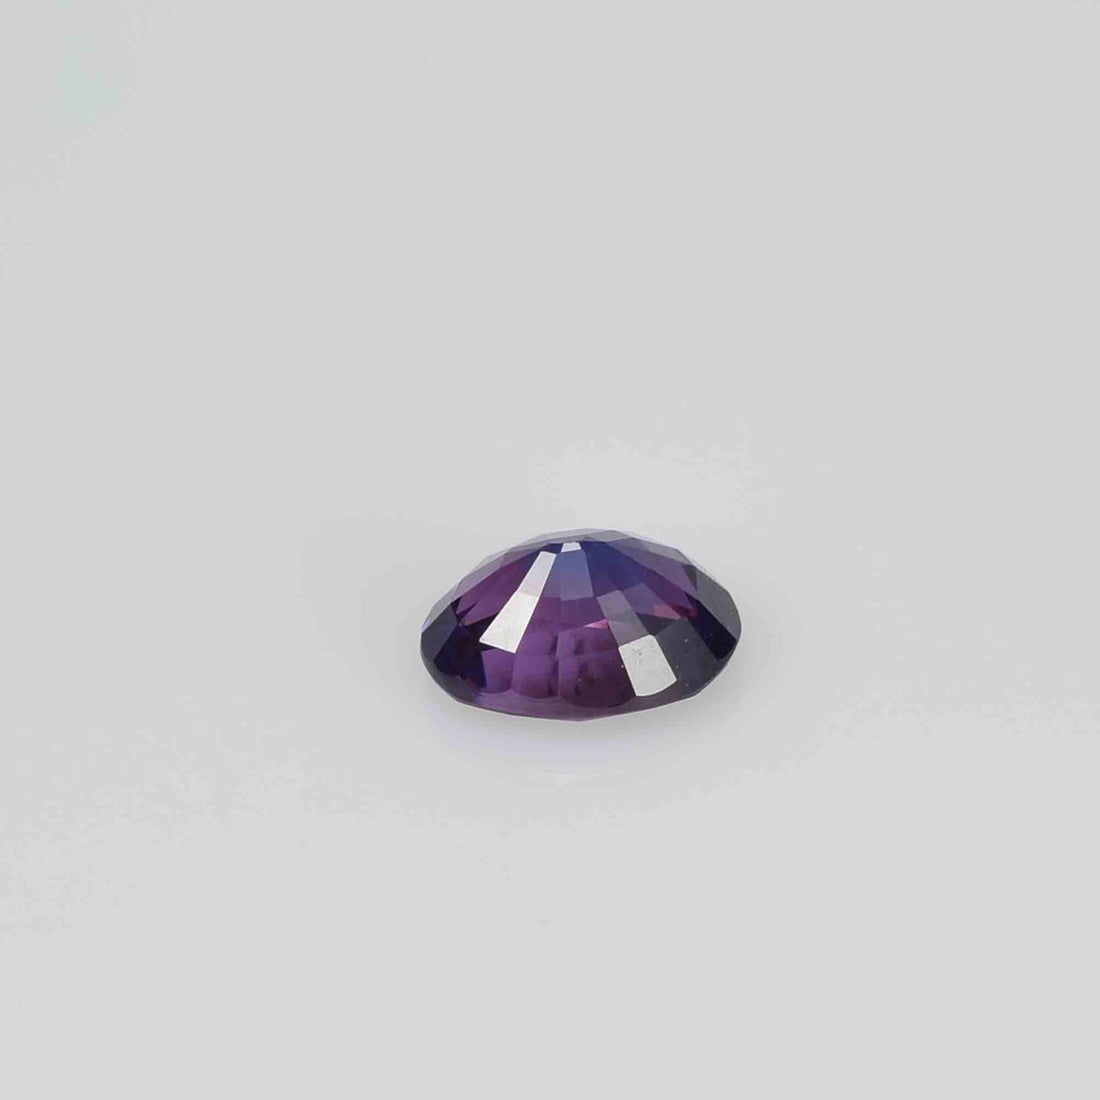 0.80cts Natural Fancy Bi-Color Sapphire Loose Gemstone oval Cut